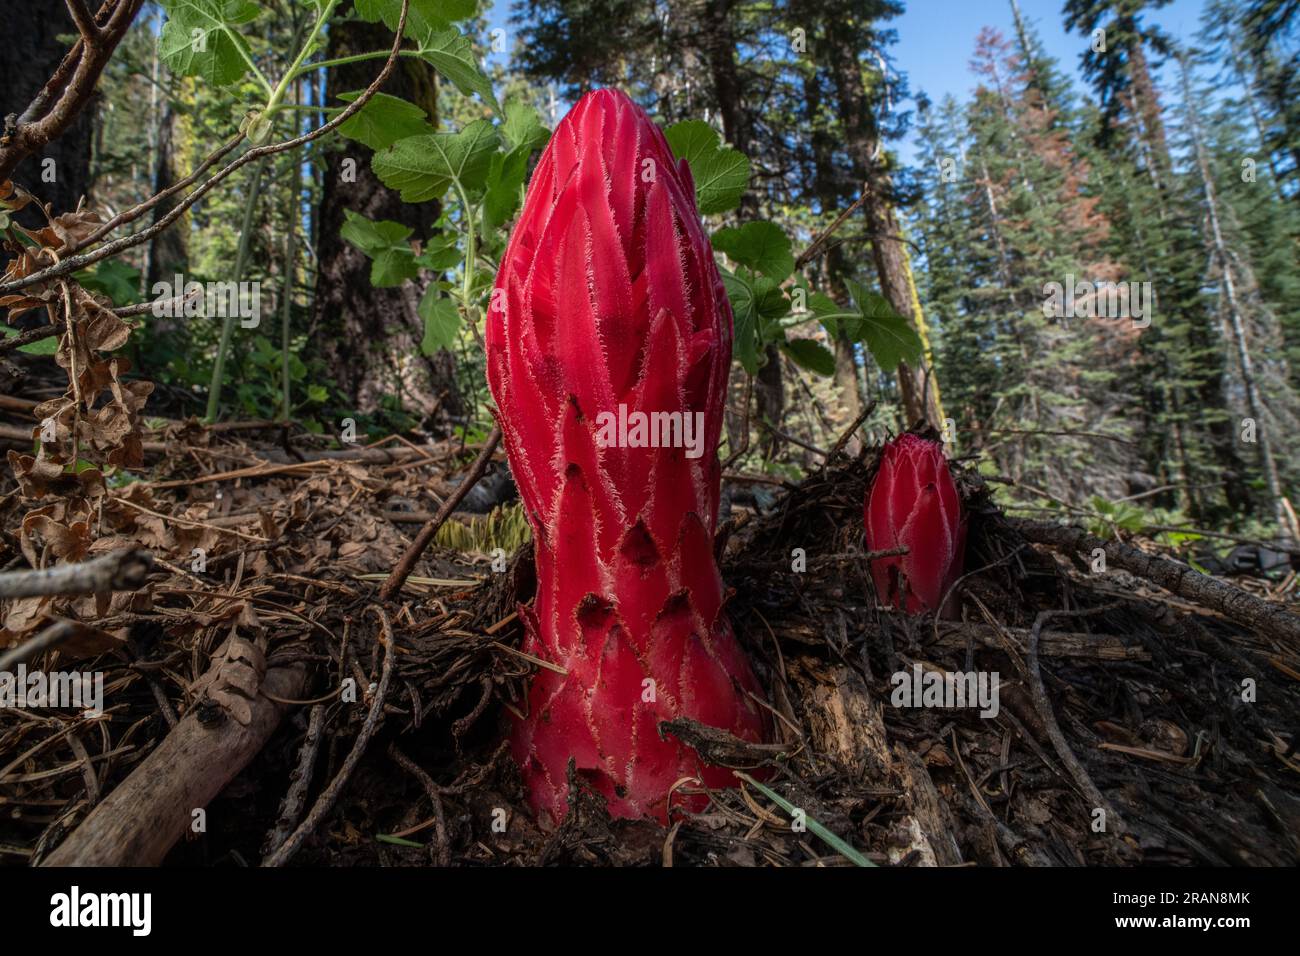 The snow plant (Sarcodes sanguinea) is a parasitic plant found in the Sierra Nevada mountains of California including Yosemite National Park. Stock Photo